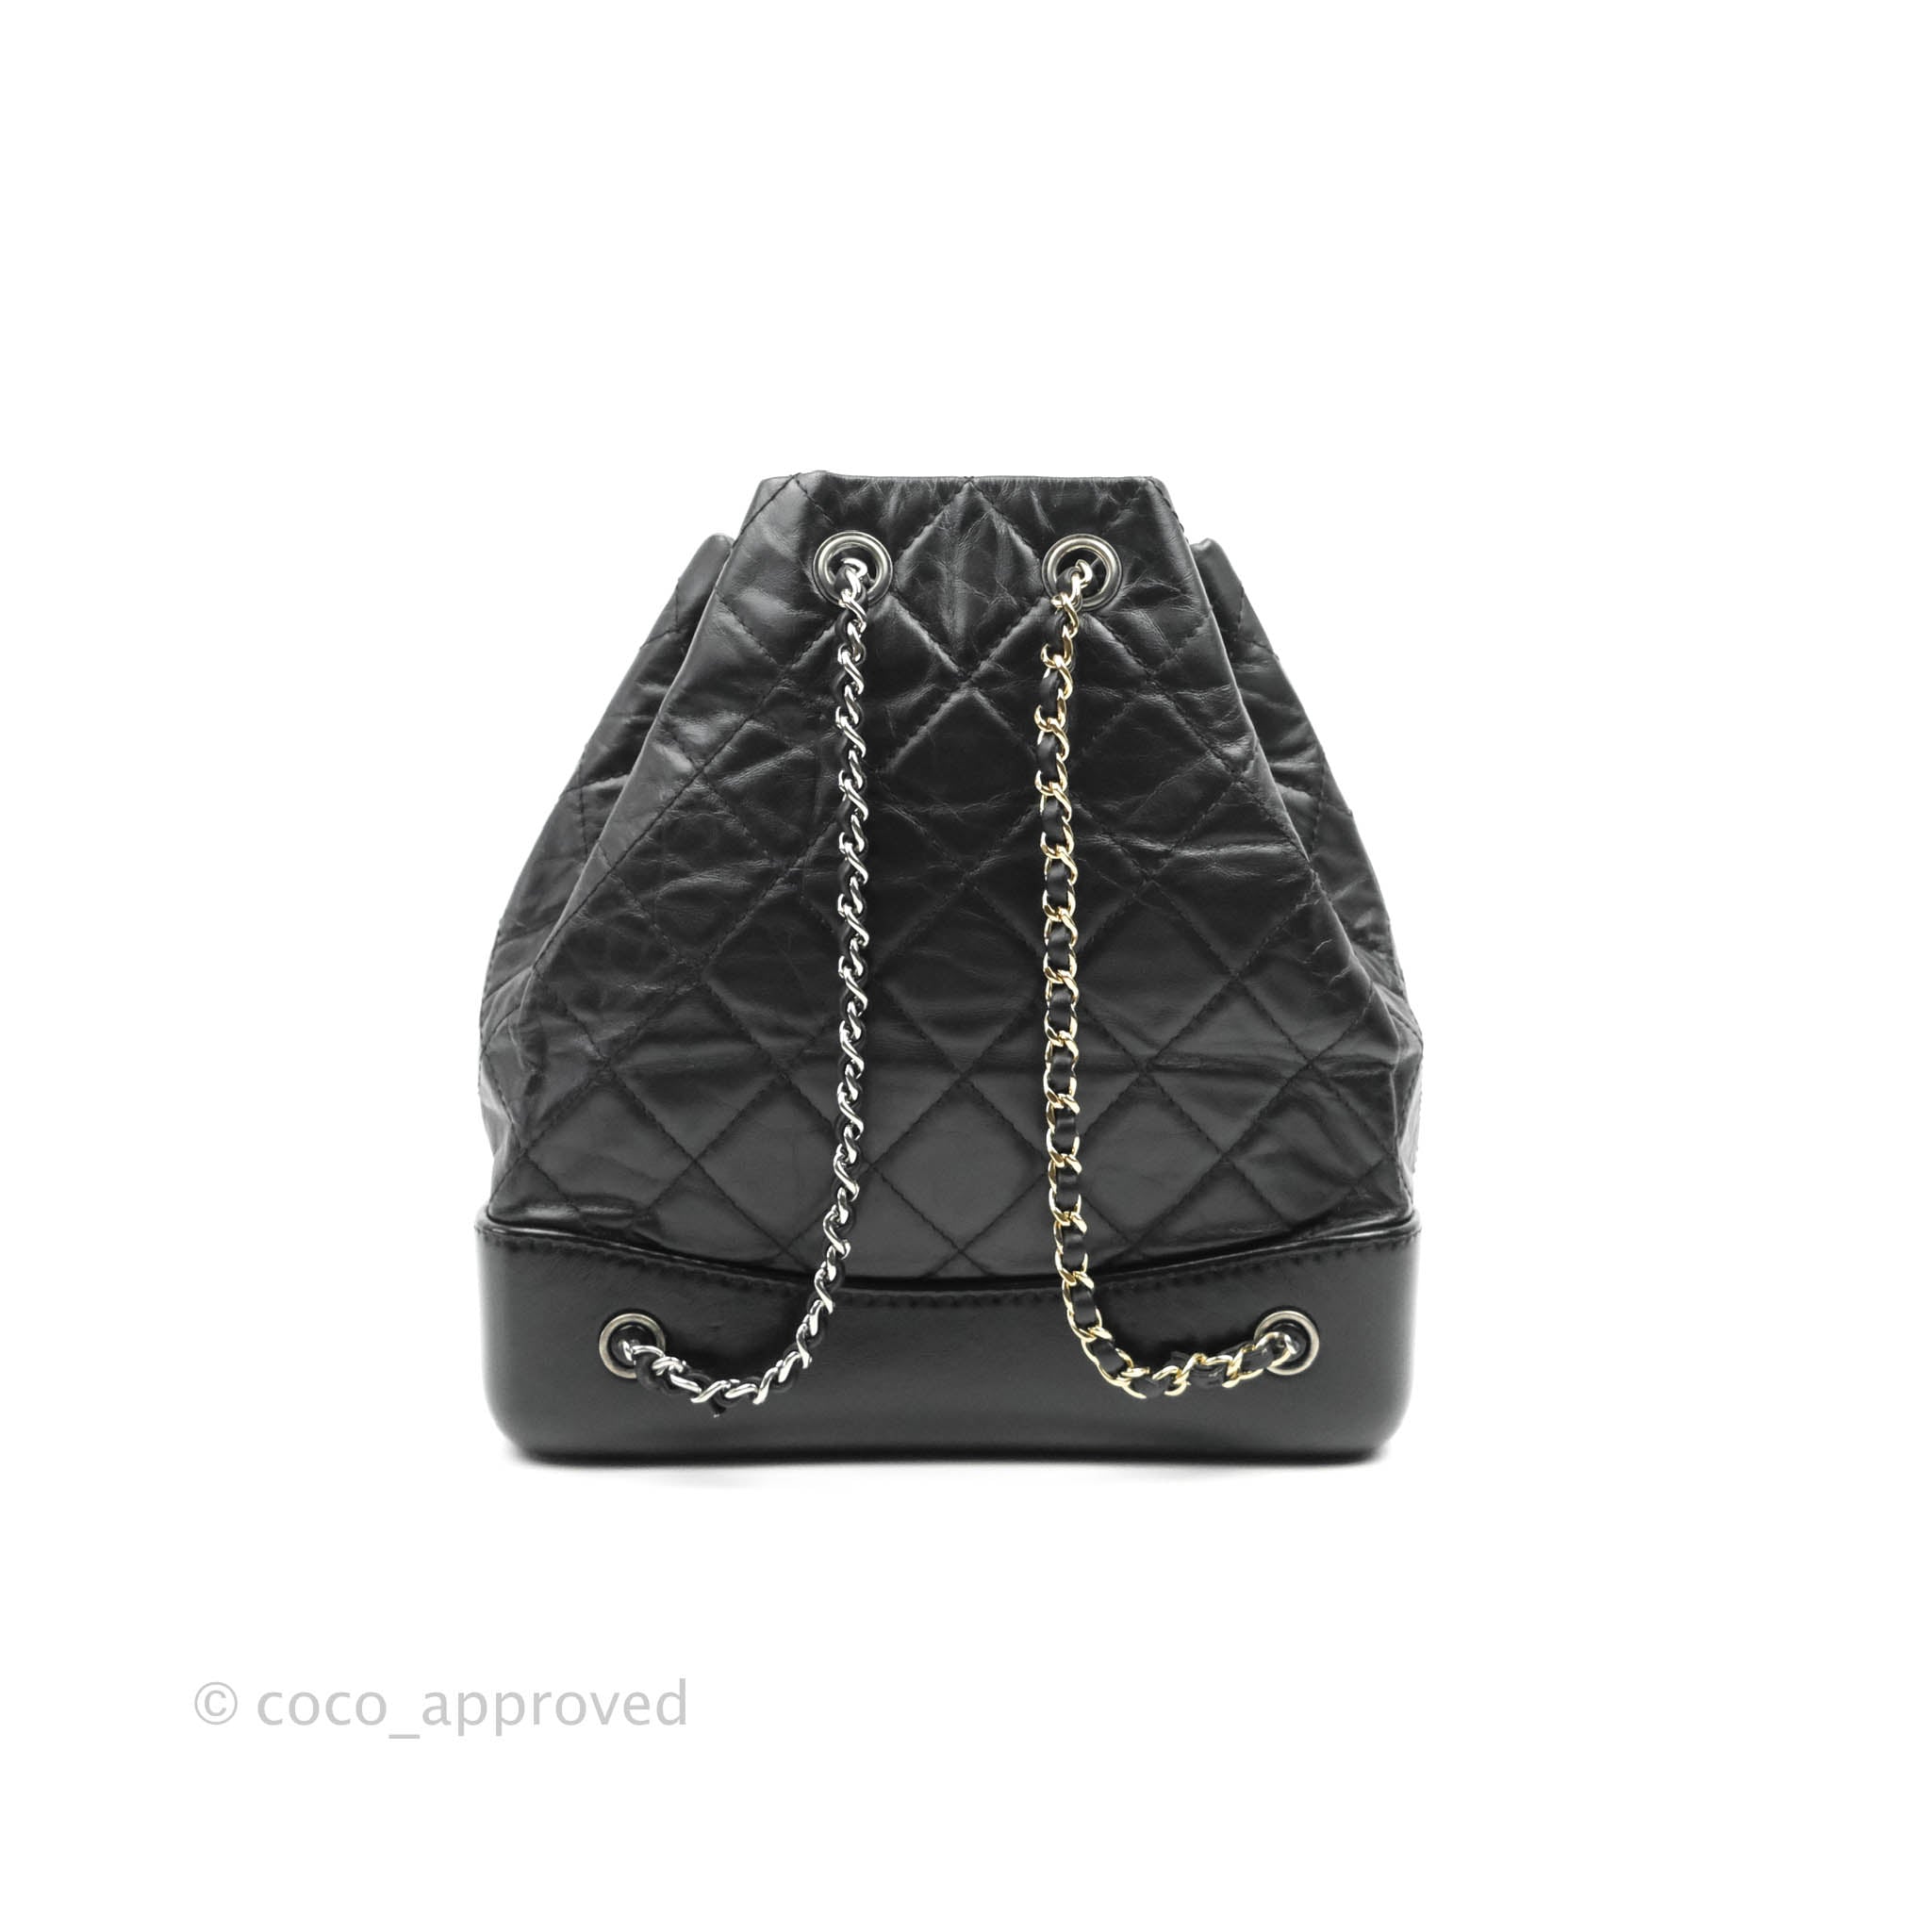 gabrielle backpack price